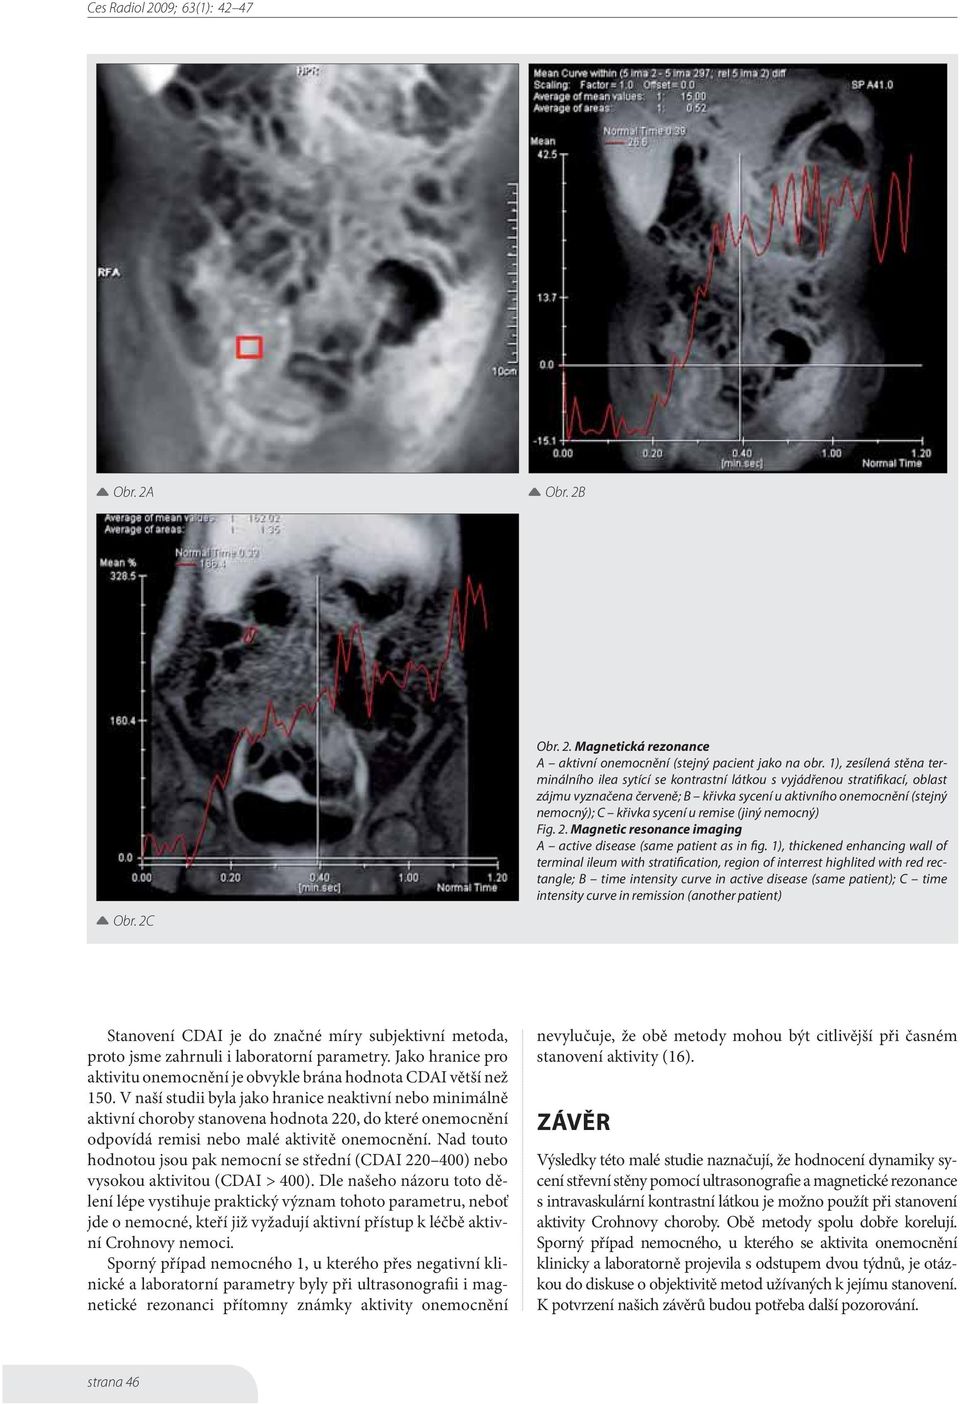 remise (jiný nemocný) Fig. 2. Magnetic resonance imaging A active disease (same patient as in fig.